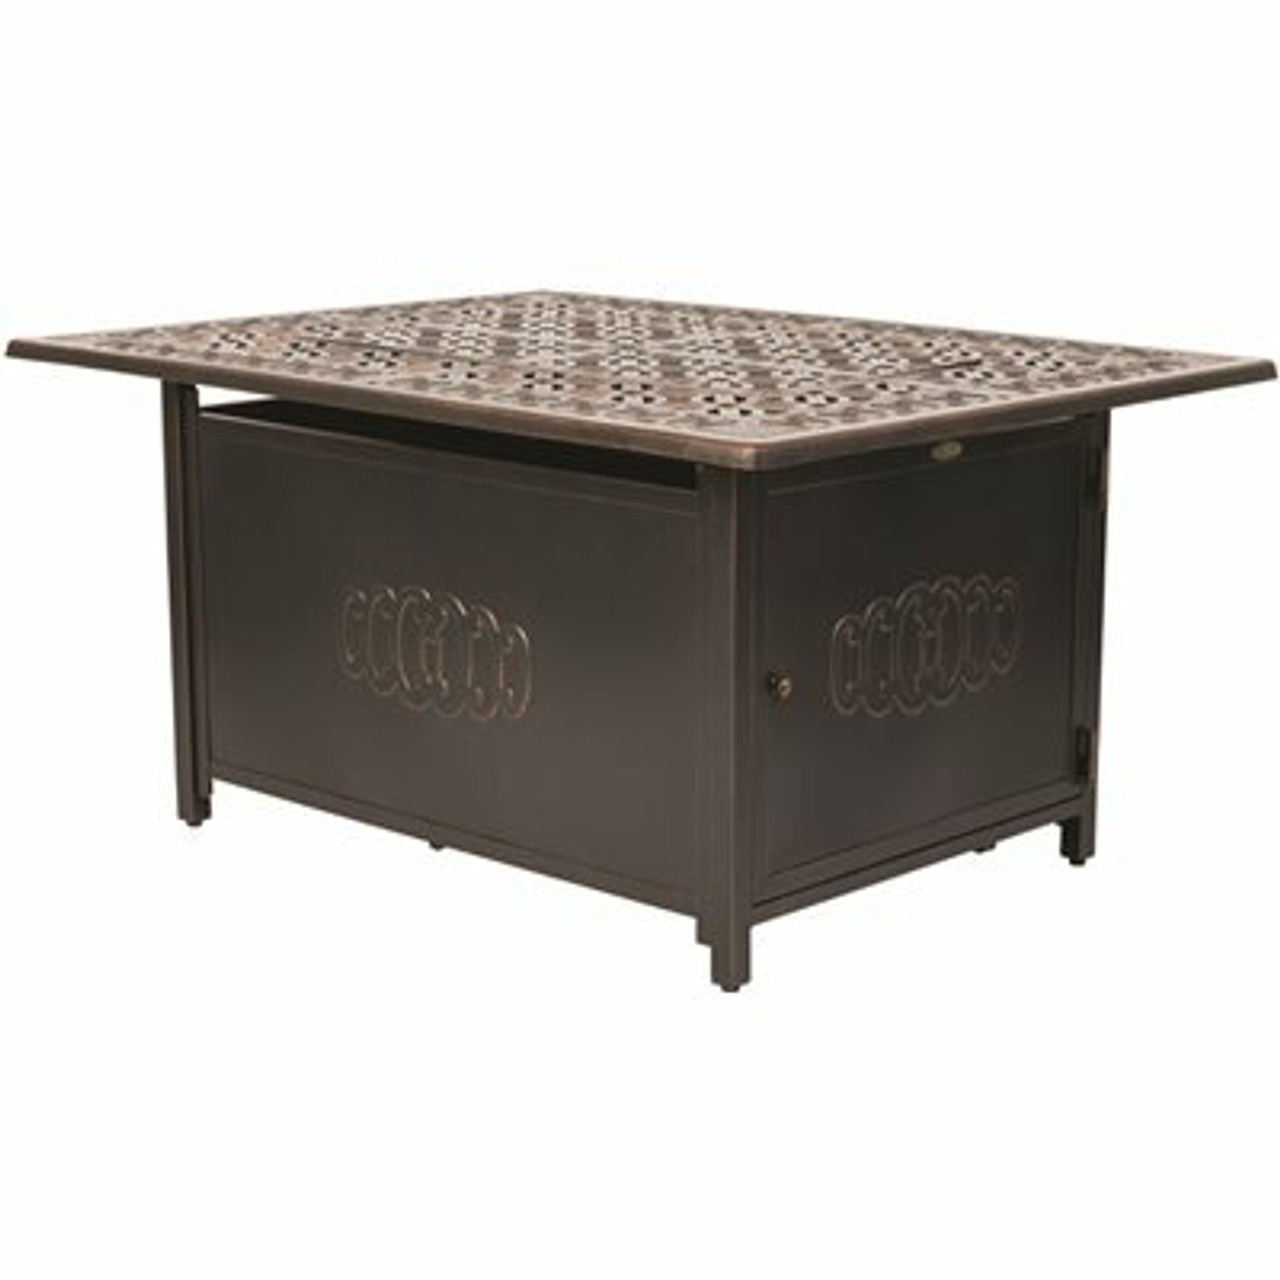 Fire Sense Dynasty 48 In. X 24 In. Rectangle Aluminum Propane Fire Pit Table In Antique Bronze